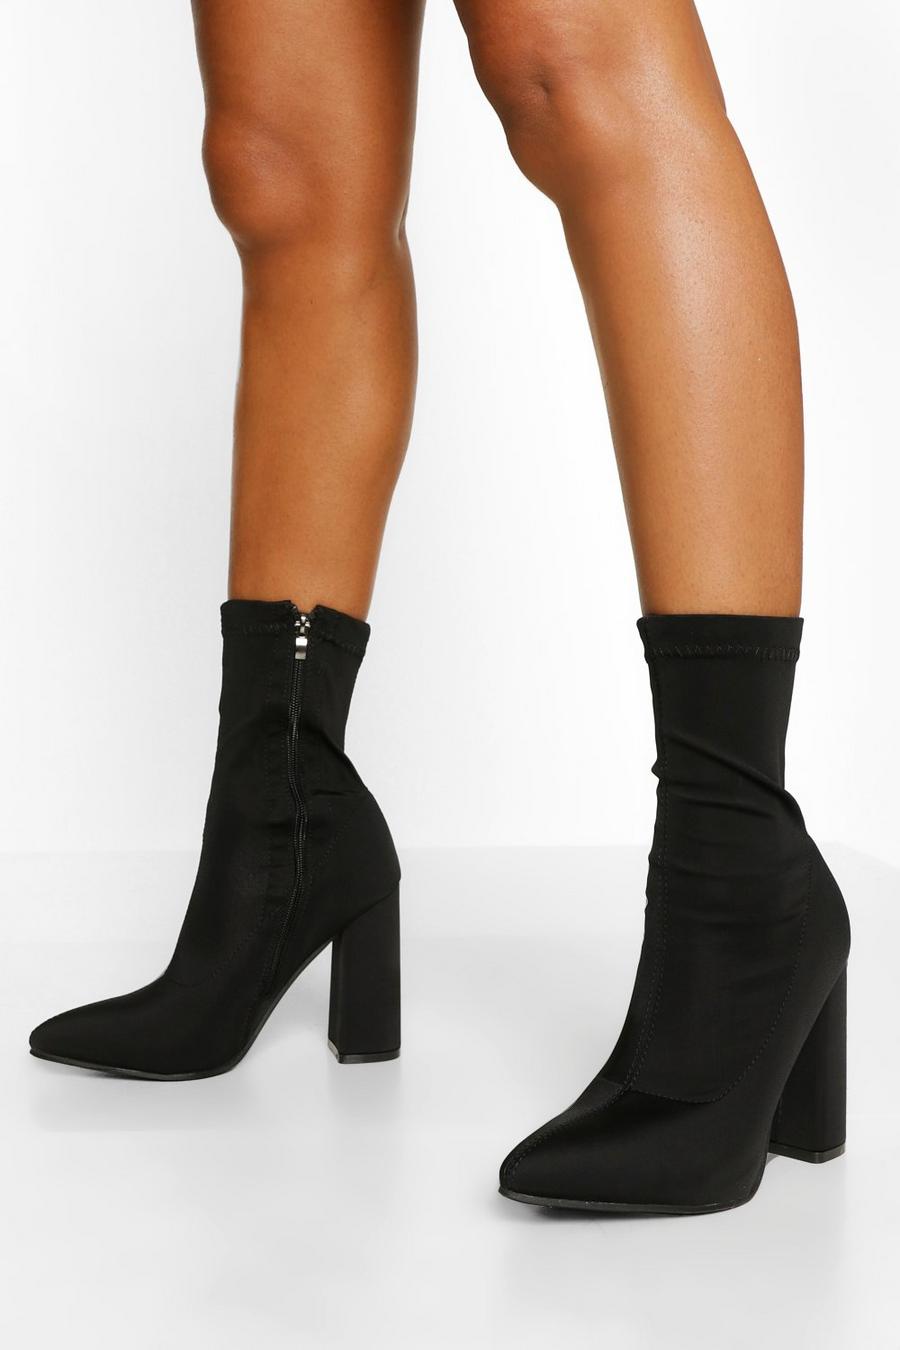 Boohoo Femme Chaussures Bottes Bottines Bottines Chaussettes Pointues 